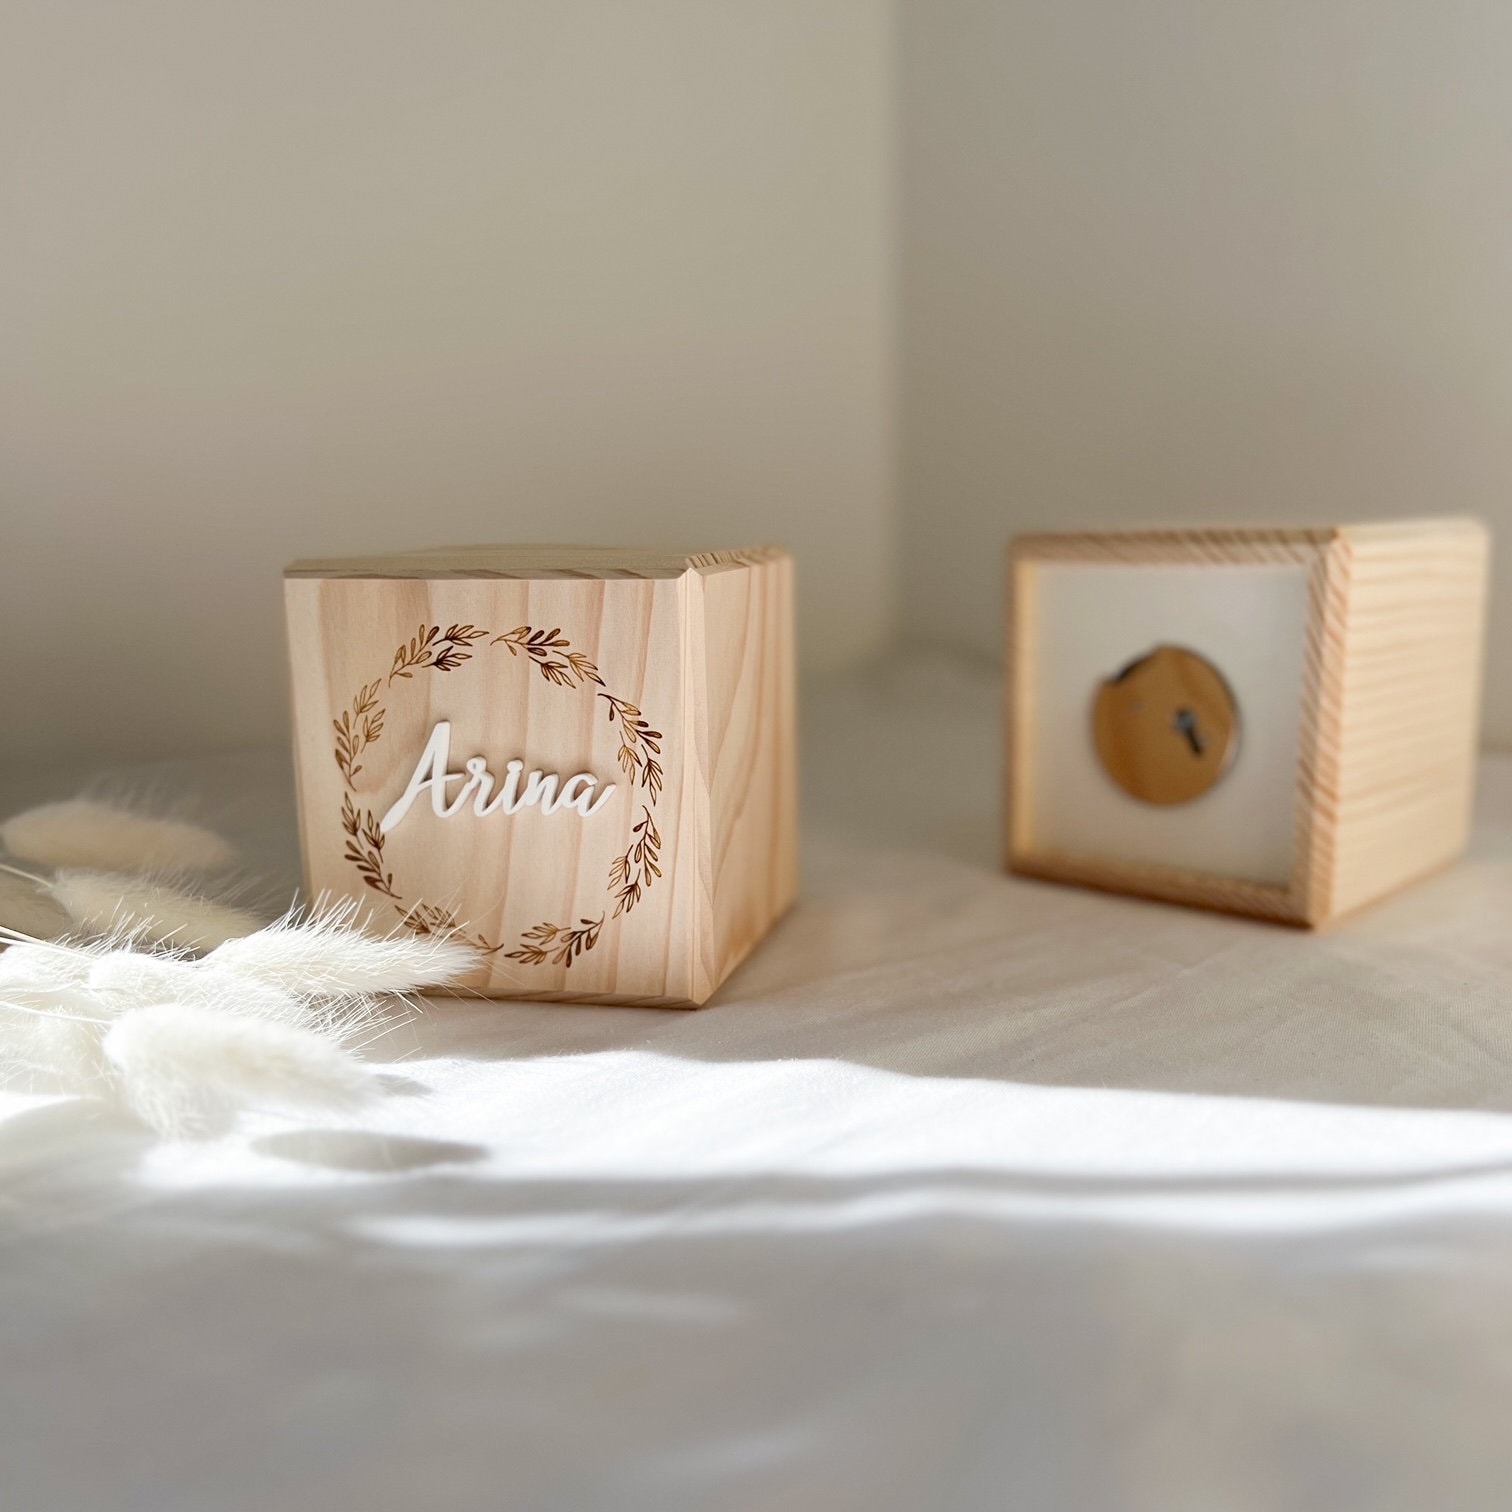 Personalized Wooden Money Box, Piggy Bank with Lock, Birthday Gift for a Child, Christmas Gift